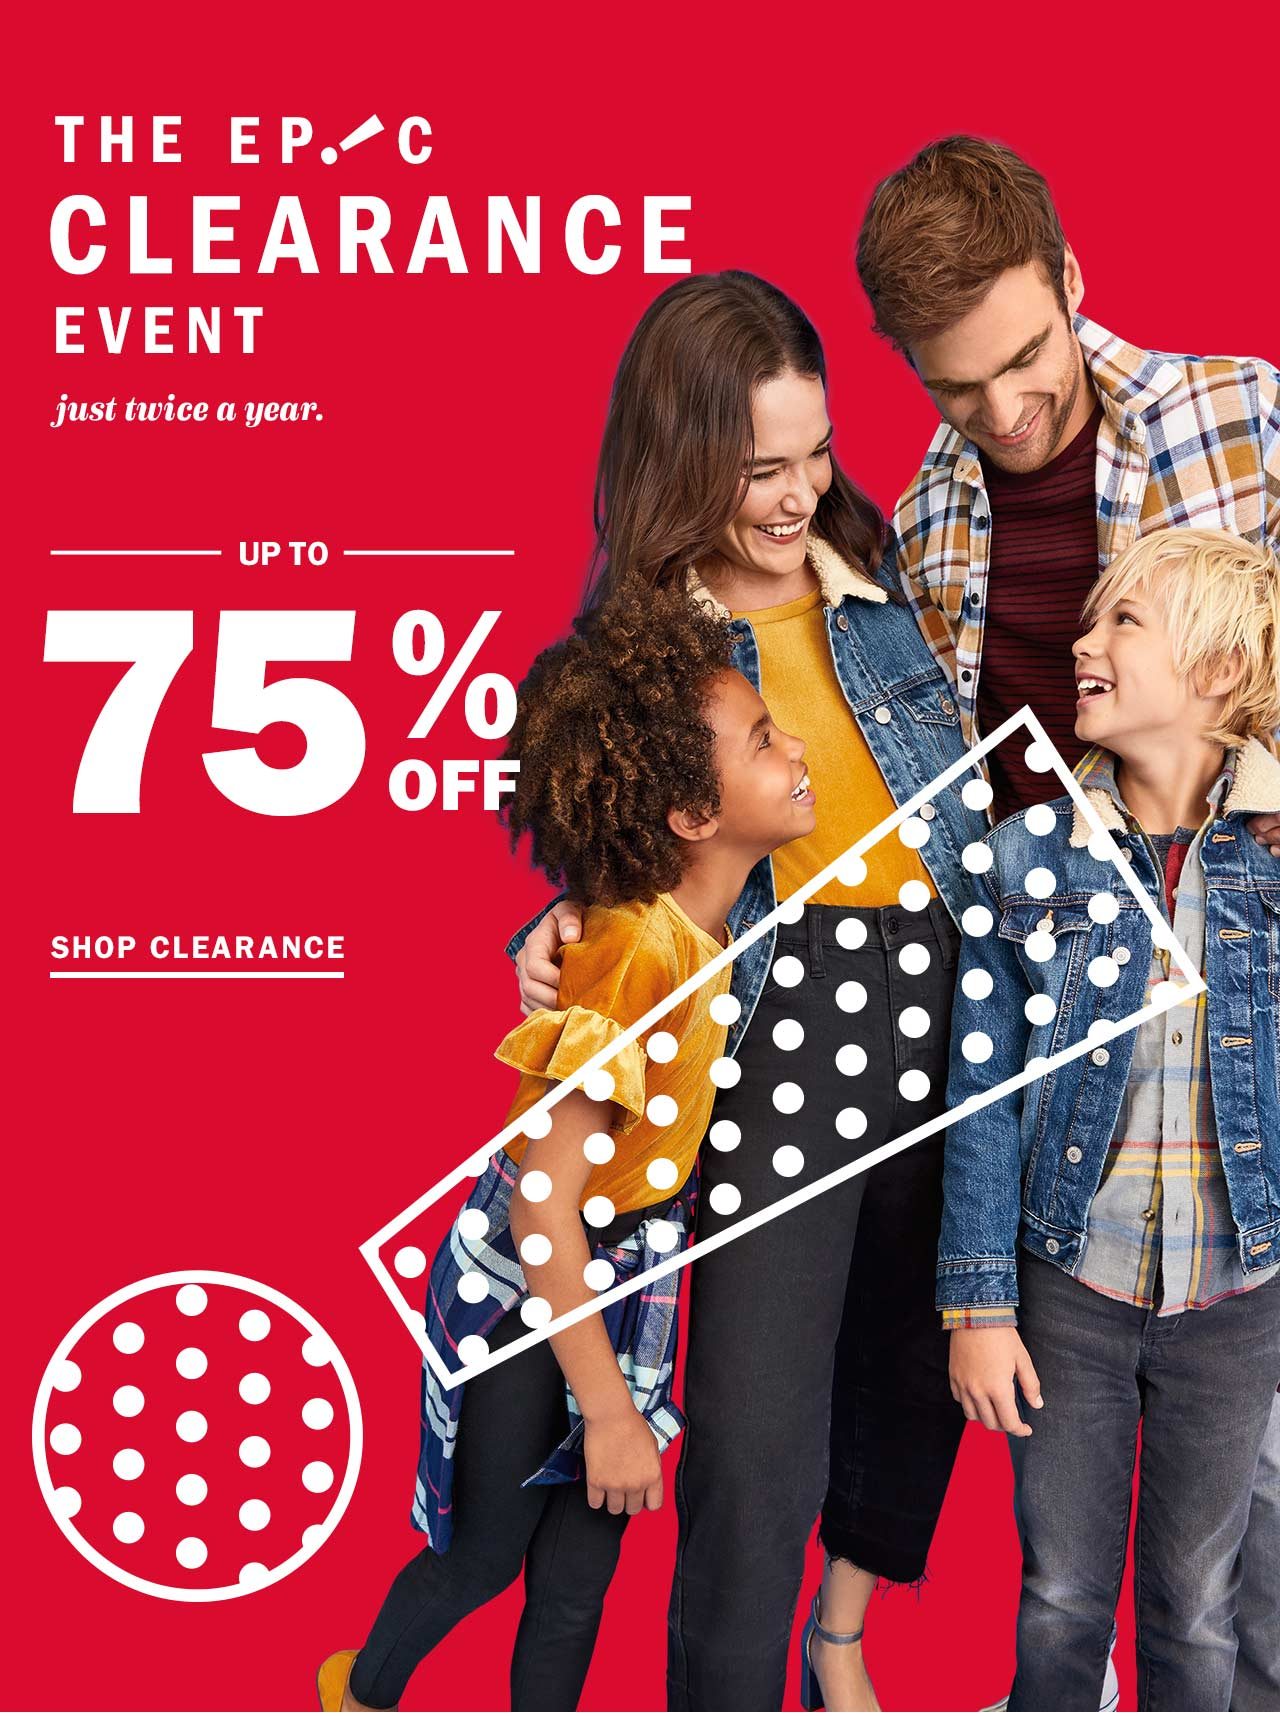 The epic clearance event